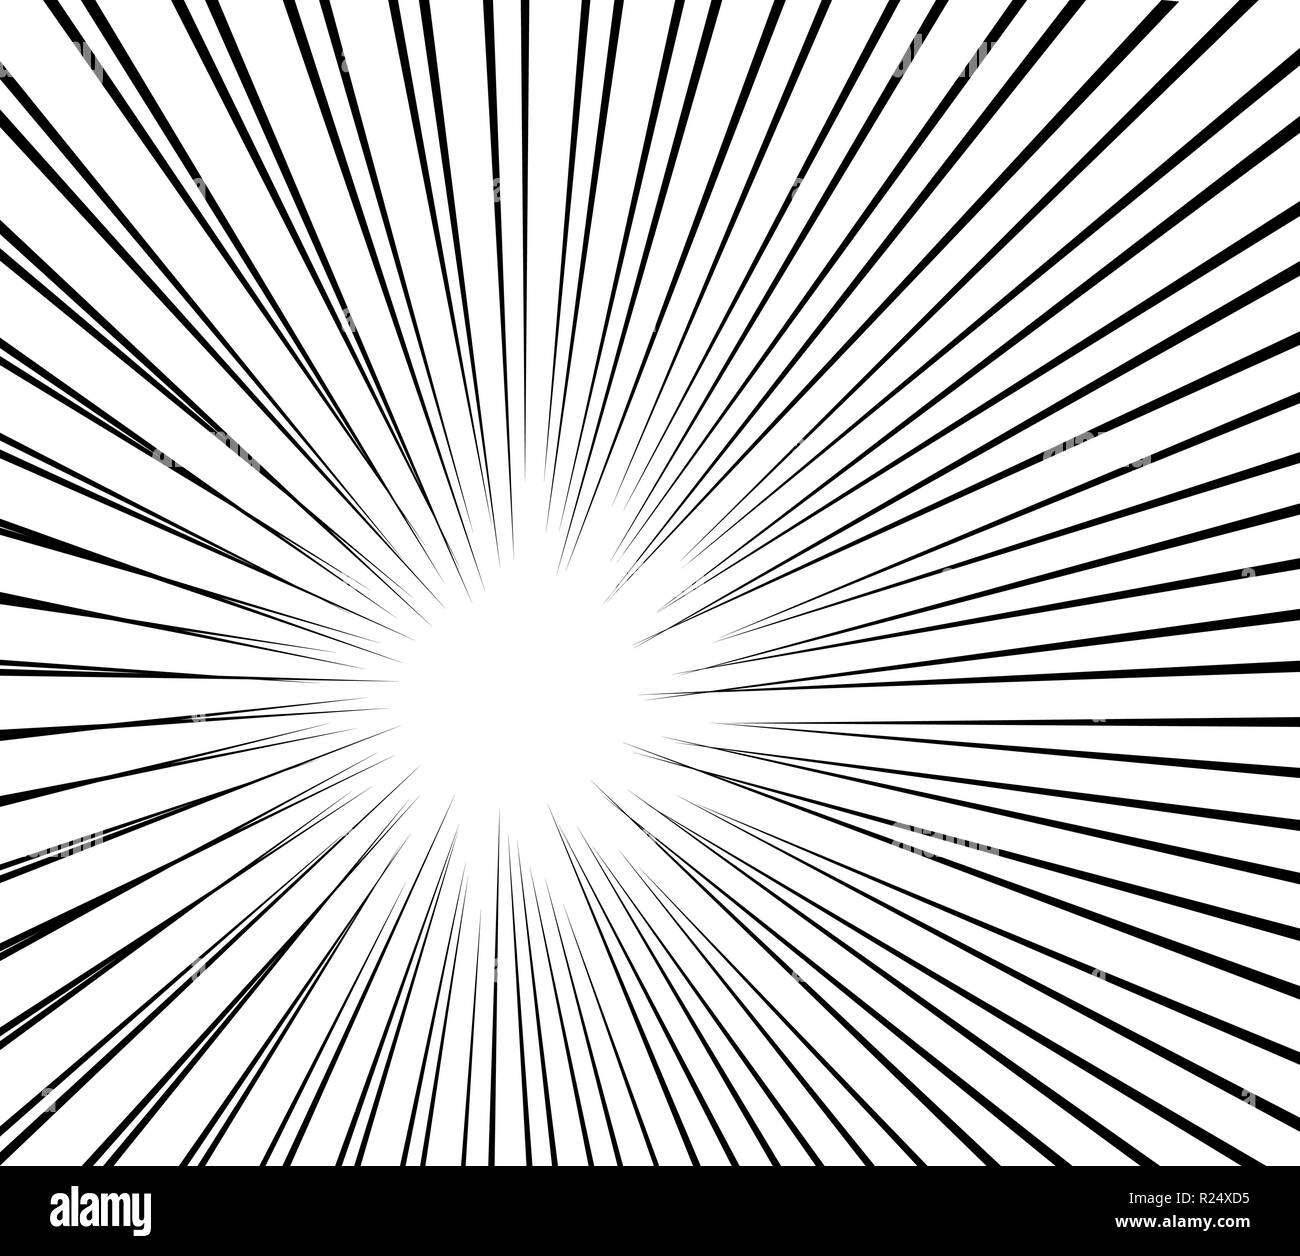 radial motion lines background texture abstract pattern design Stock Vector